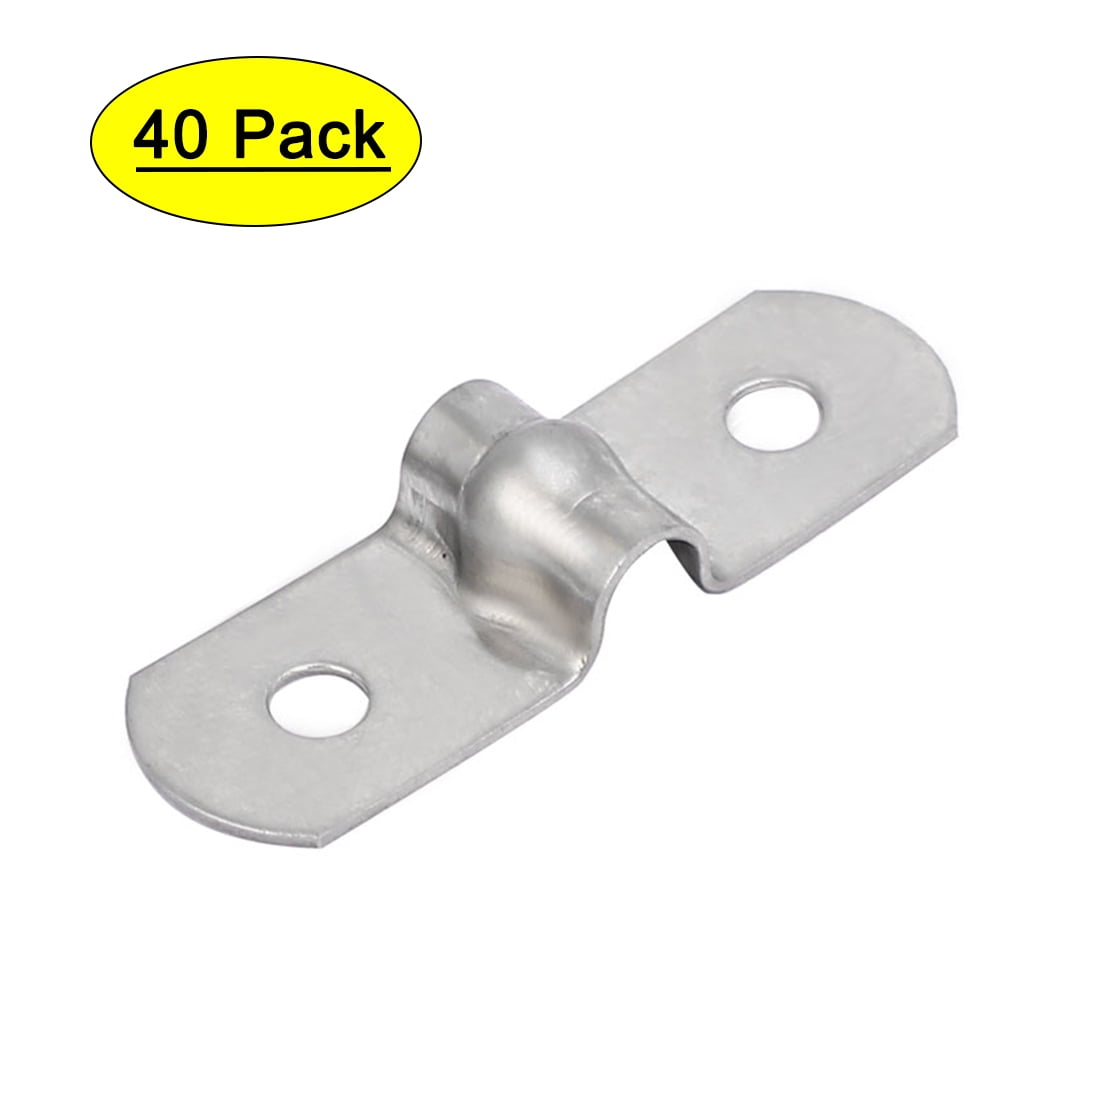 Pack of 1 Apl Tec-Clamp SS Clip 